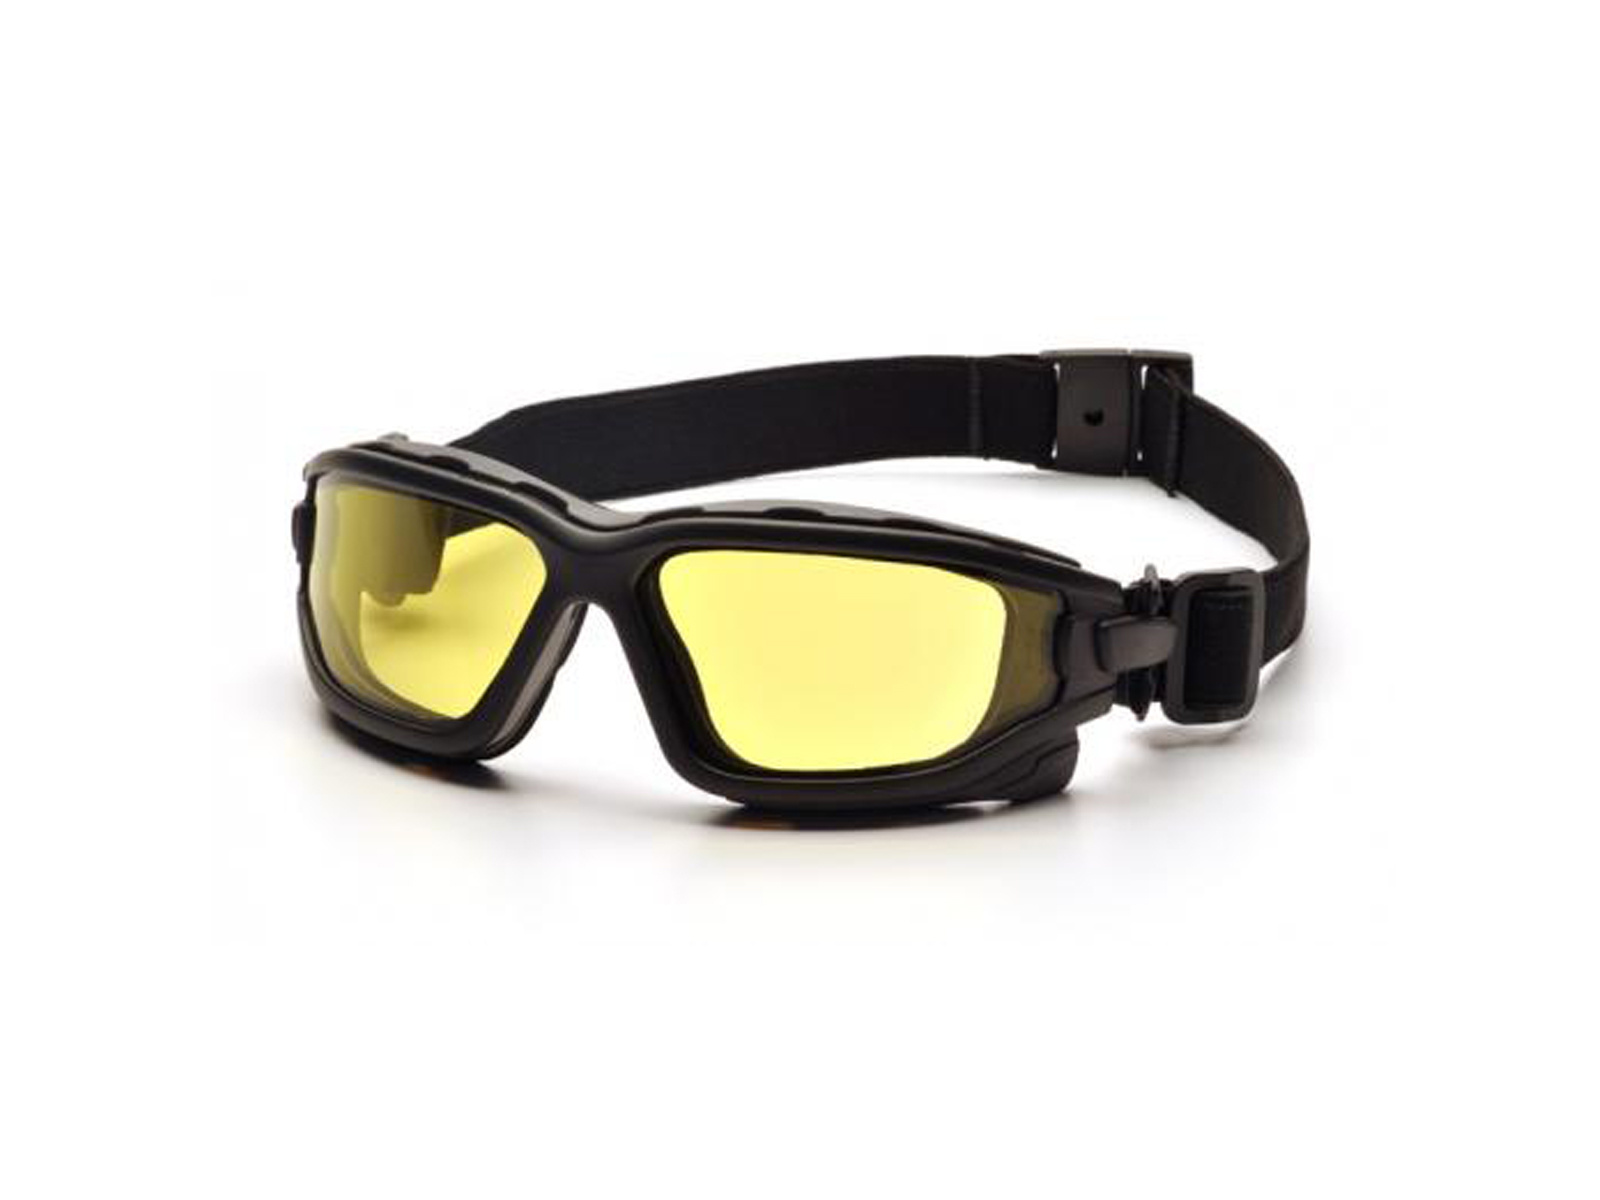 ASG Lunettes Tactiques Strike Systems - Jaune